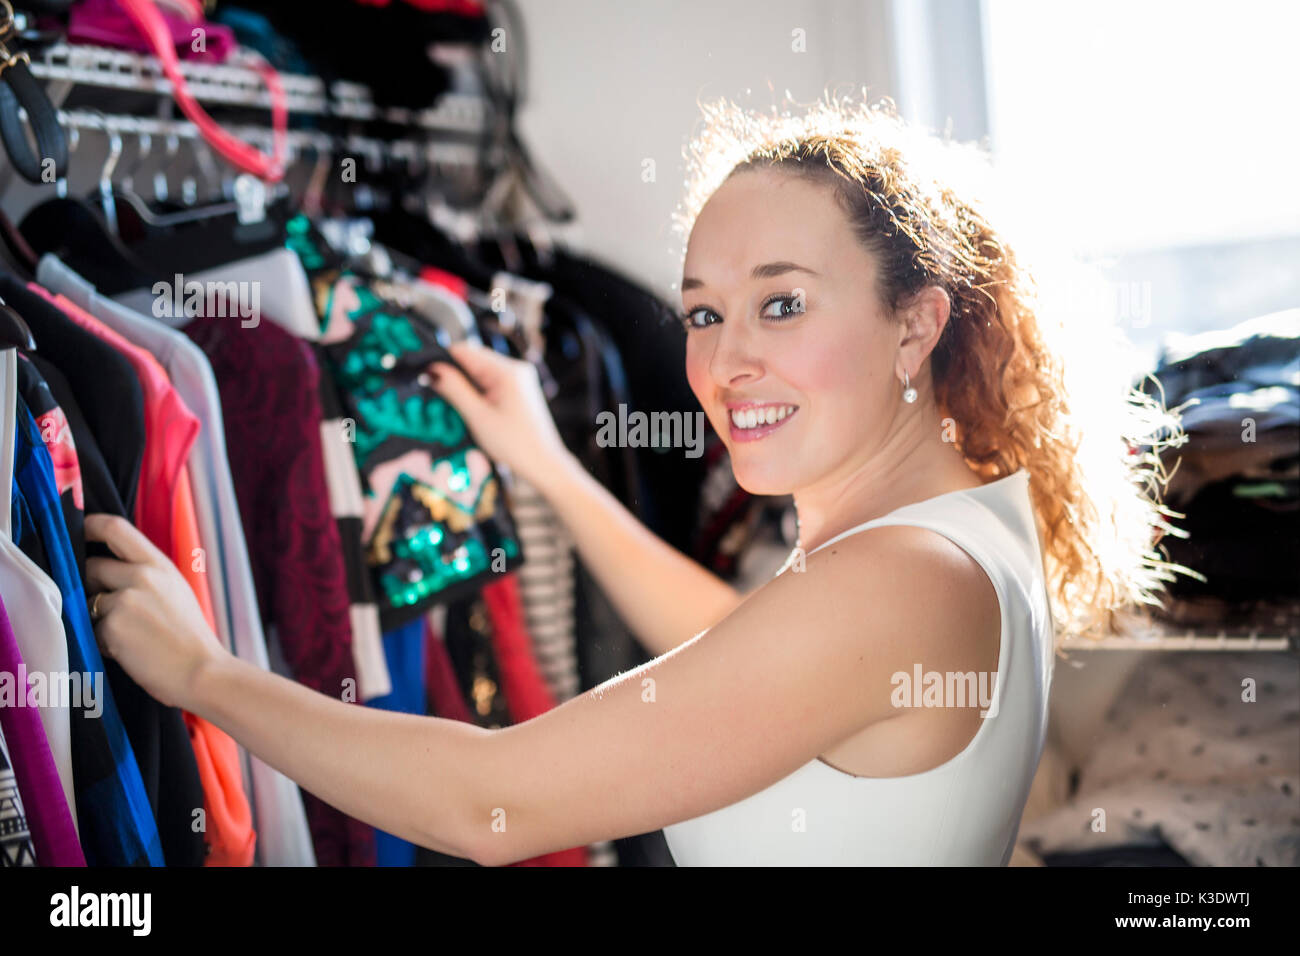 Young woman choosing an outfit to wear. Stock Photo